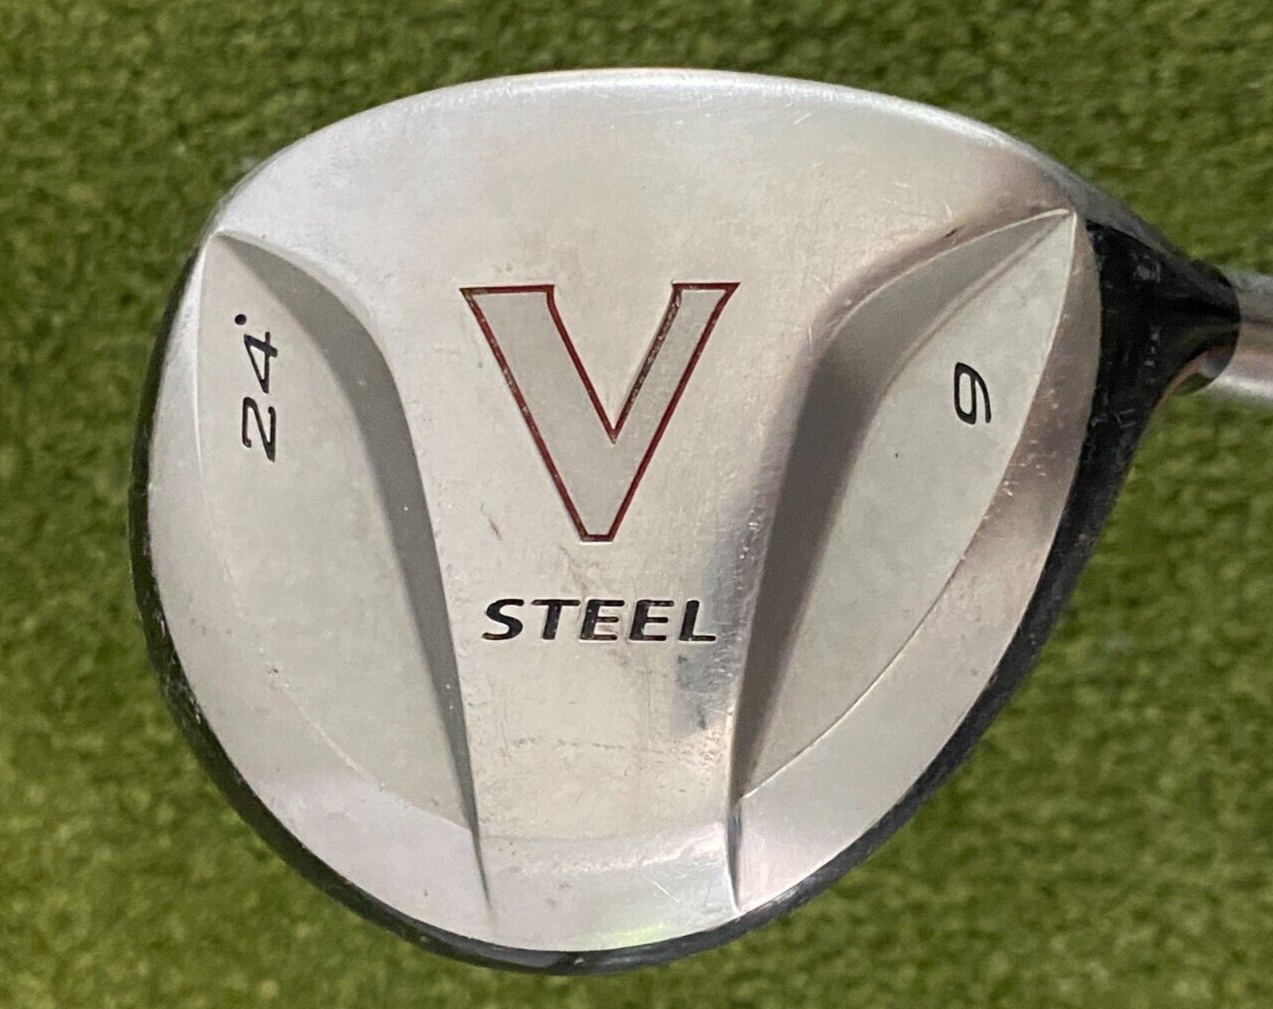 TaylorMade V Steel 24* 9 Wood RH TaylorMade M.A.S.2 Seniors Graphite (L8816)